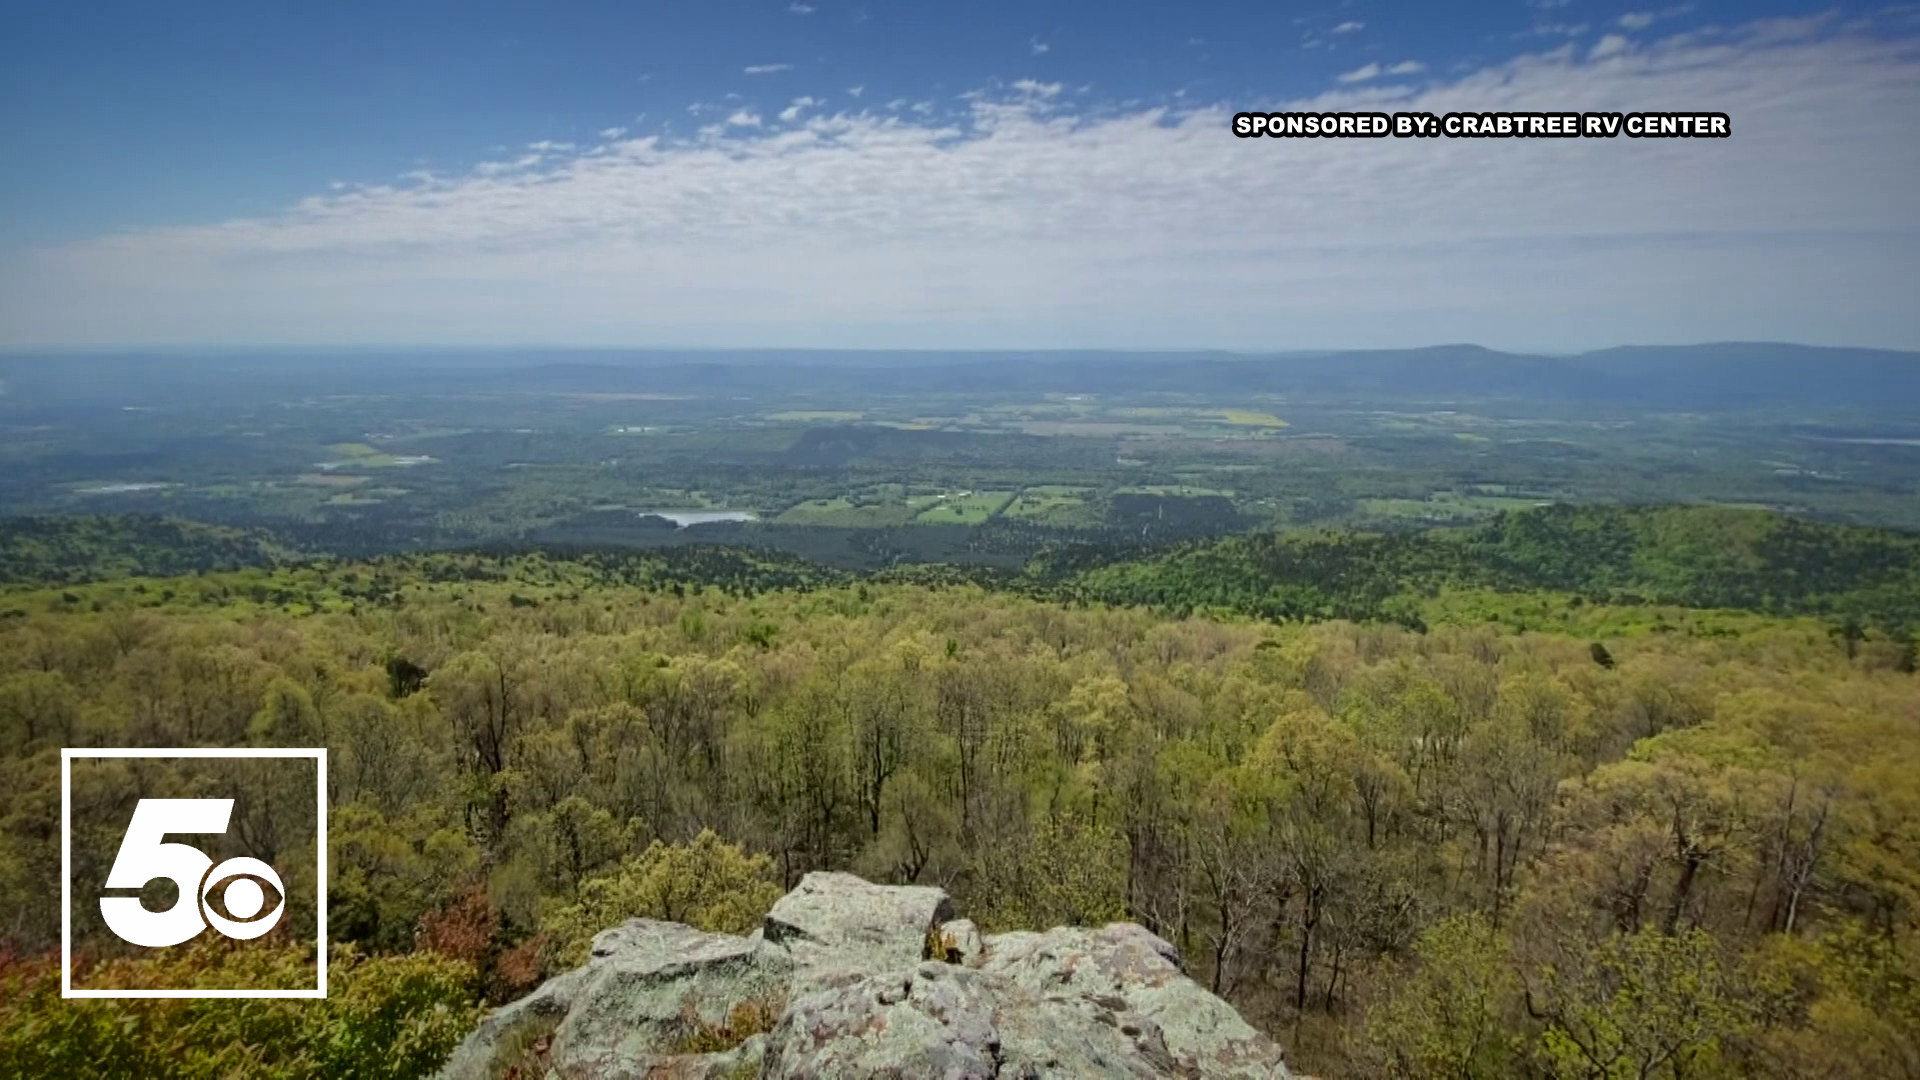 Take a trip to the highest point in Arkansas - Mount Magazine - in this week's Adventure Arkansas!